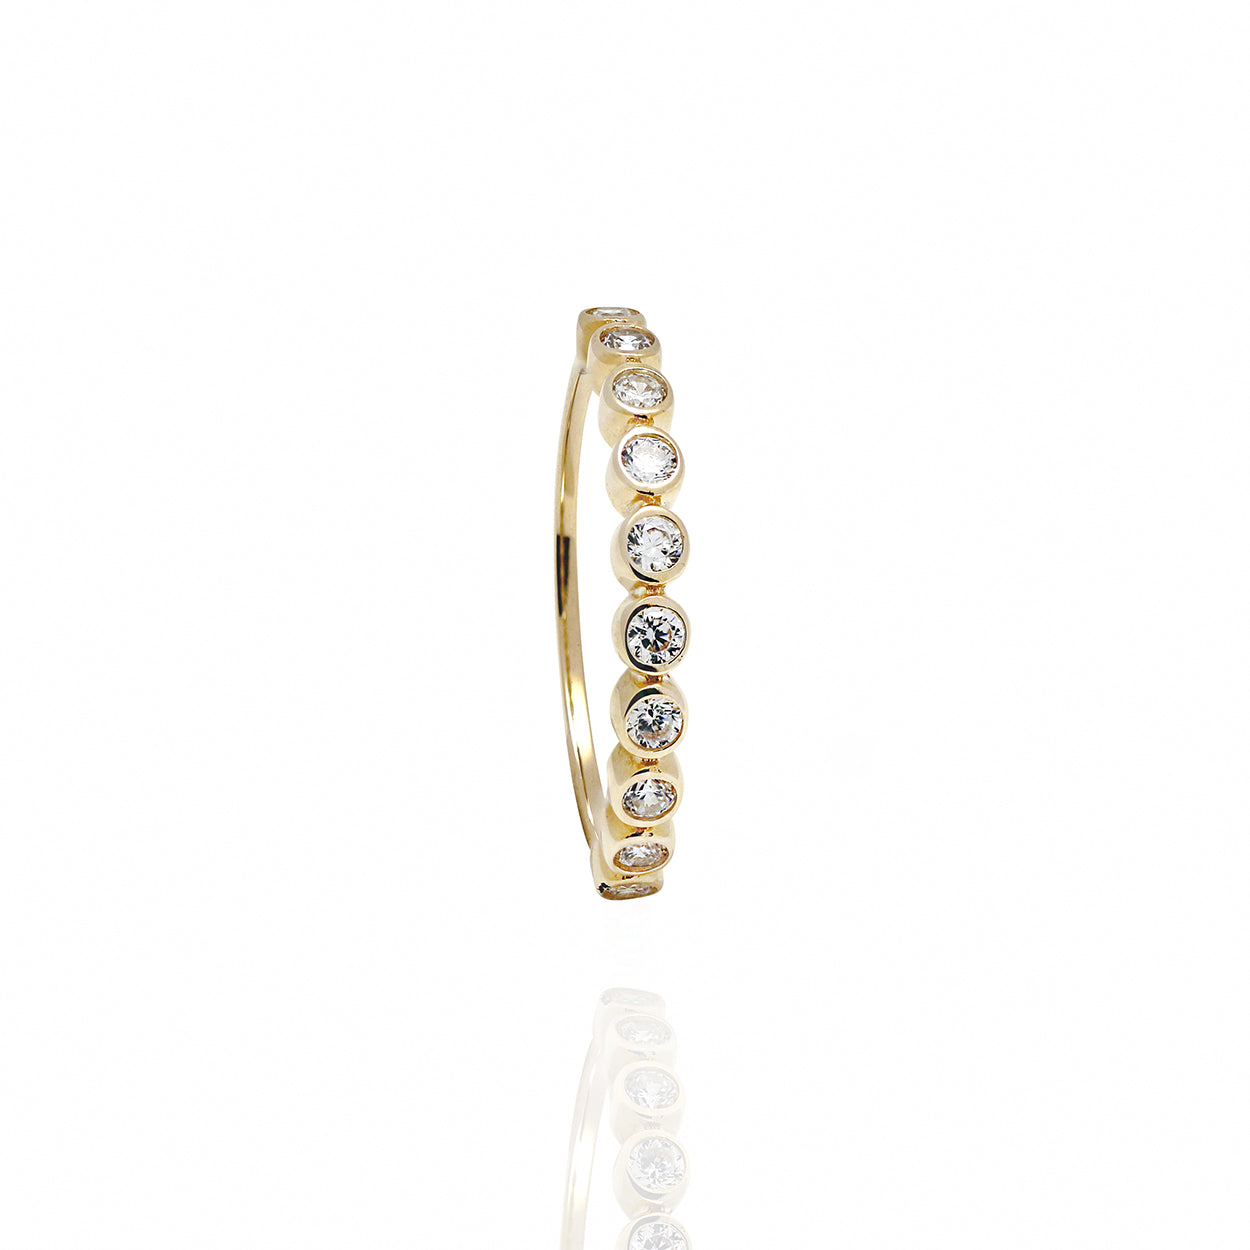 10kt Yellow Gold Ring with Bezel Set Beads of Cubic Zirconia 2